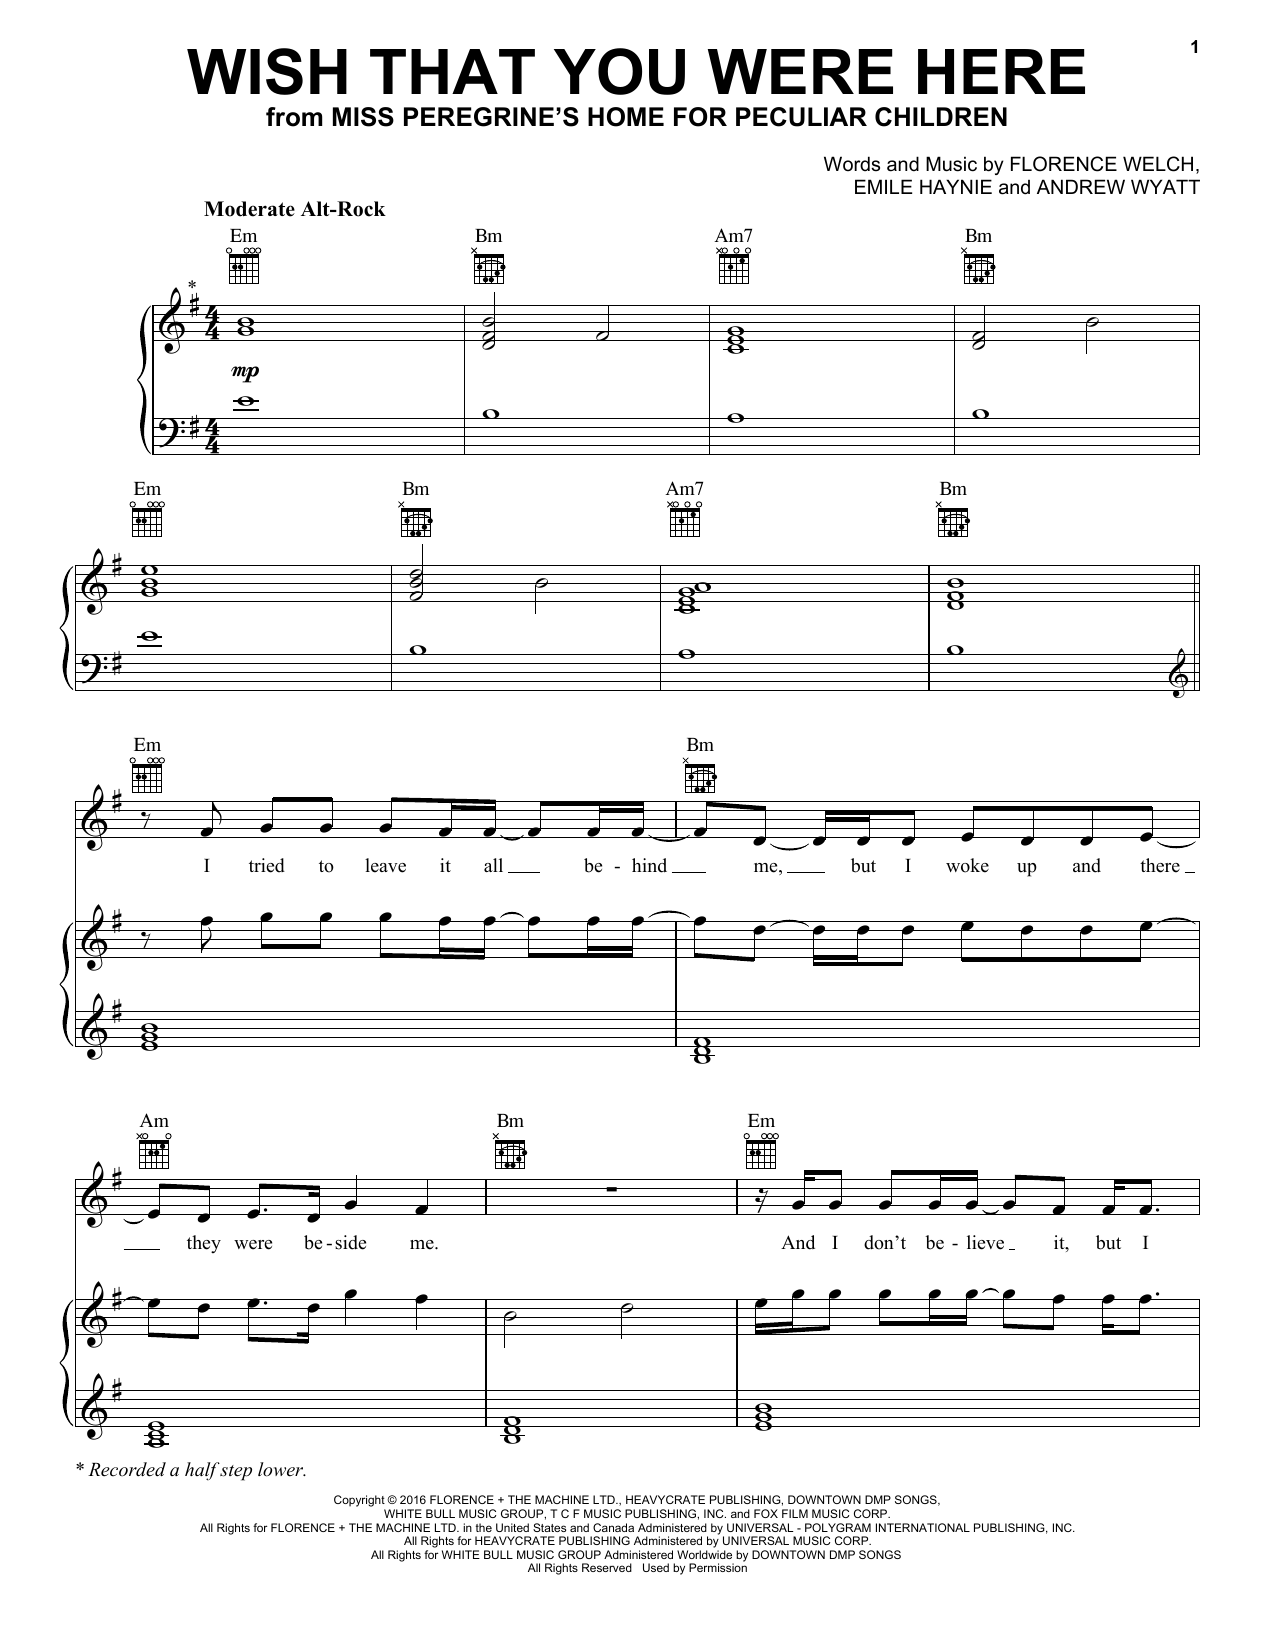 Download Florence And The Machine Wish That You Were Here Sheet Music